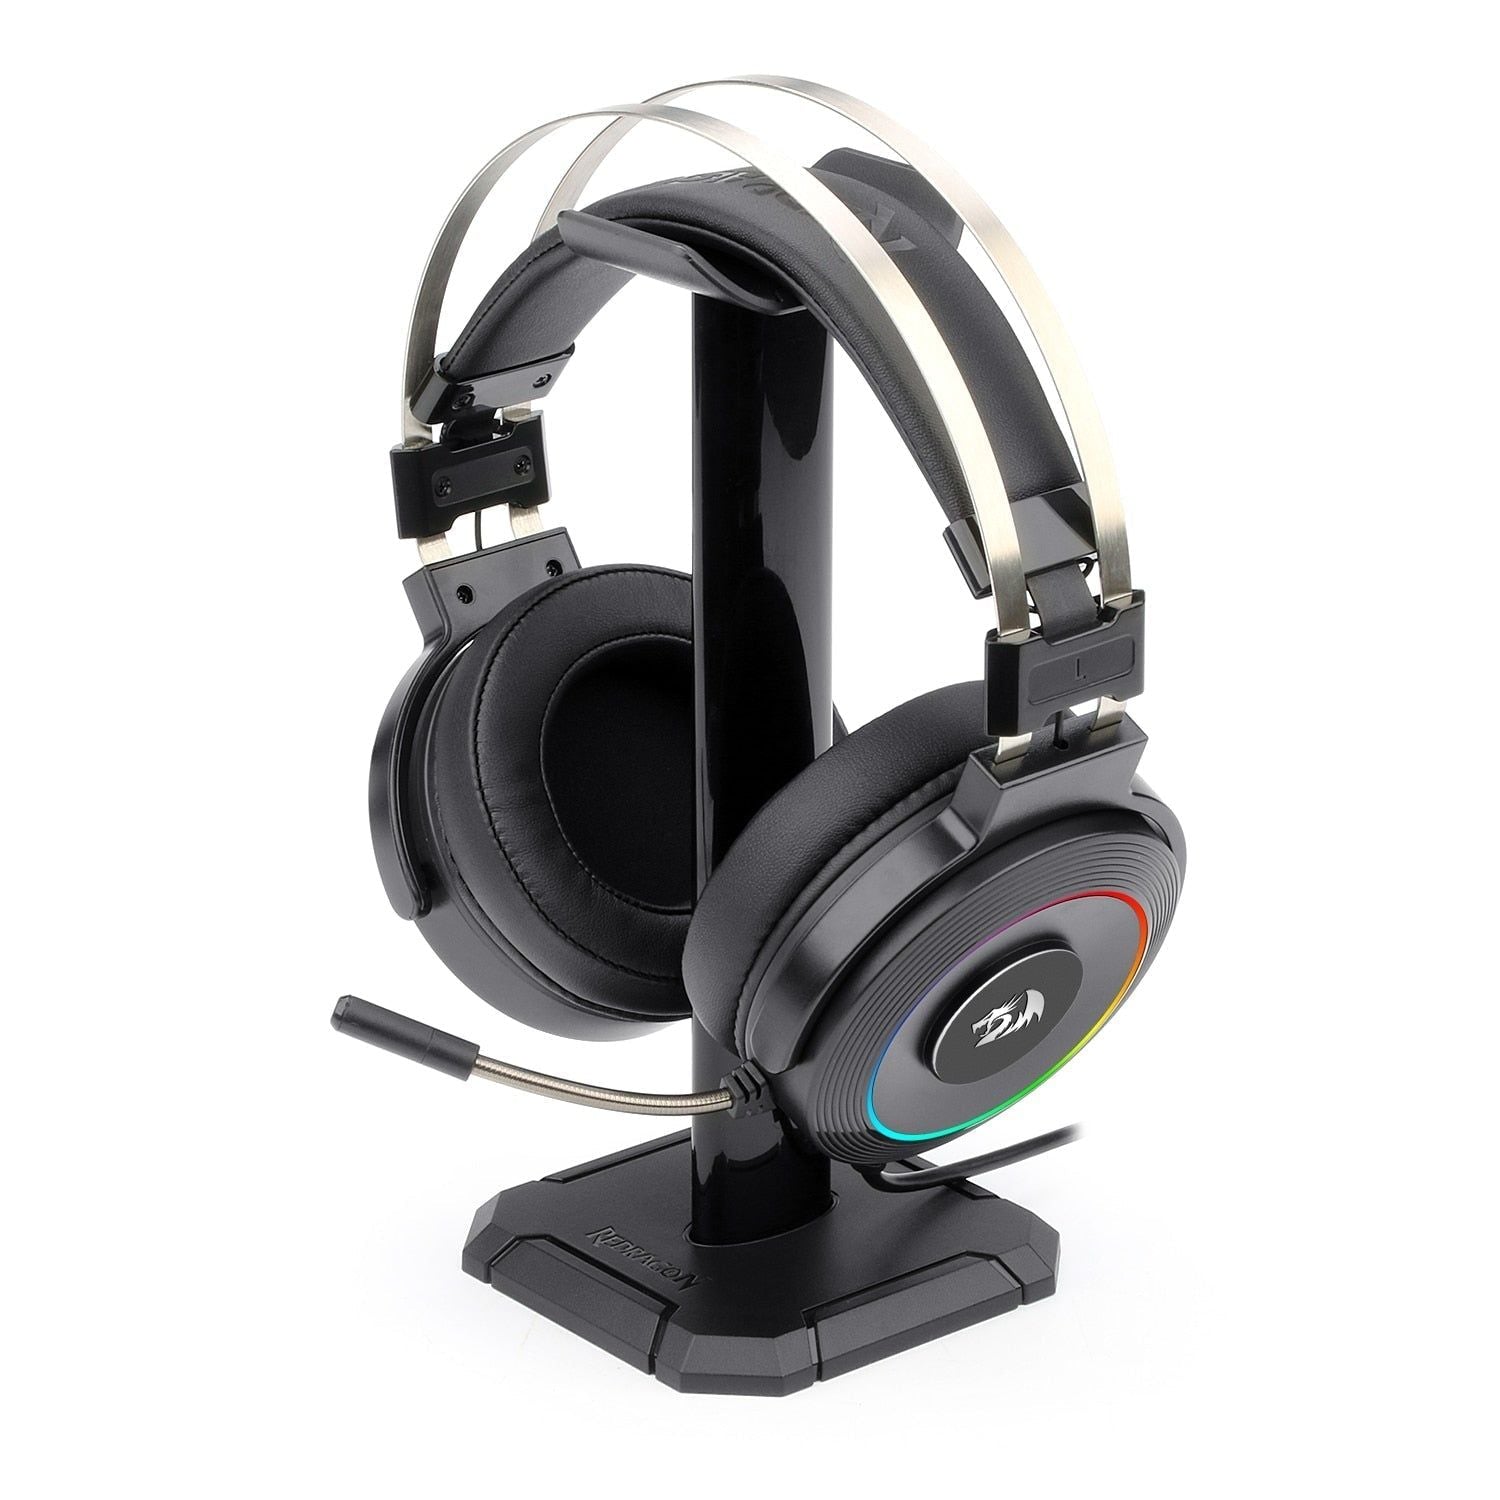 H320 Lamia Gaming Headset 7.1 Surround With Noise Cancelling and RGB Light for PC/PS4 | Hifi Media Store